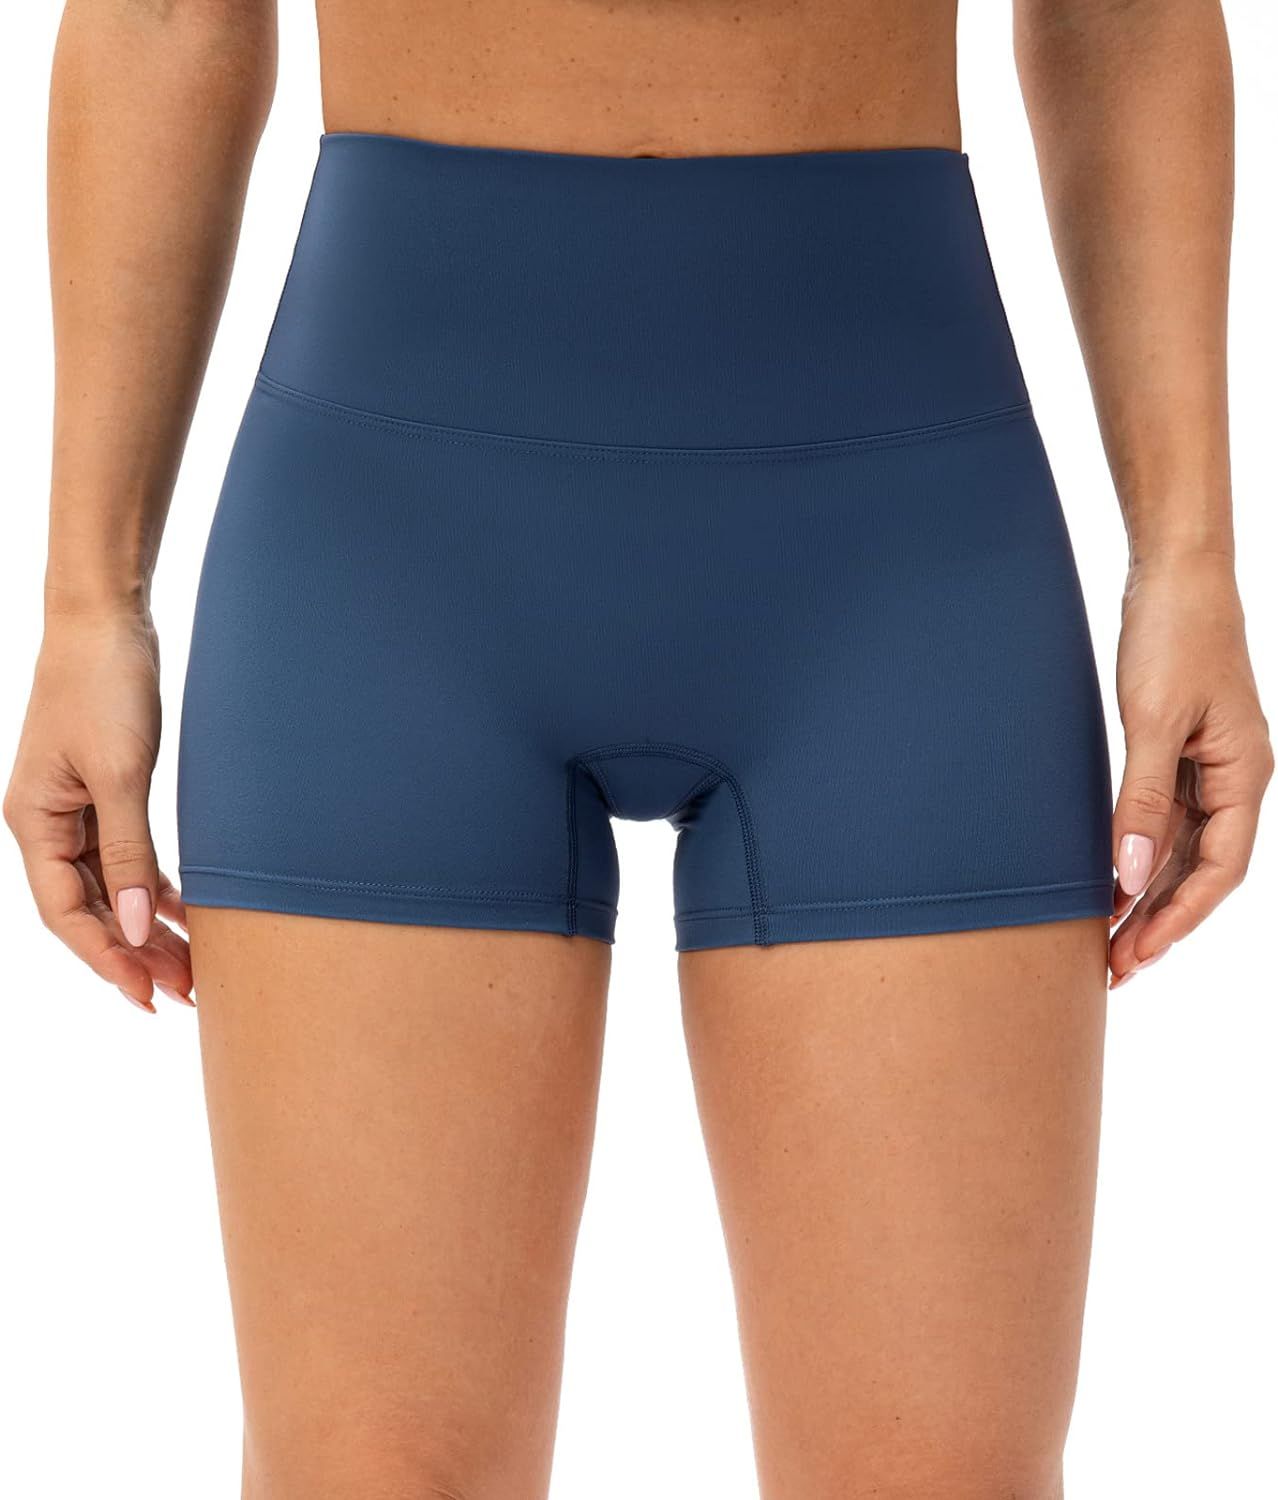 Lavento Women's All Day Soft Yoga Shorts - 3" / 5" Buttery Soft Workout Active Shorts for Women | Amazon (US)